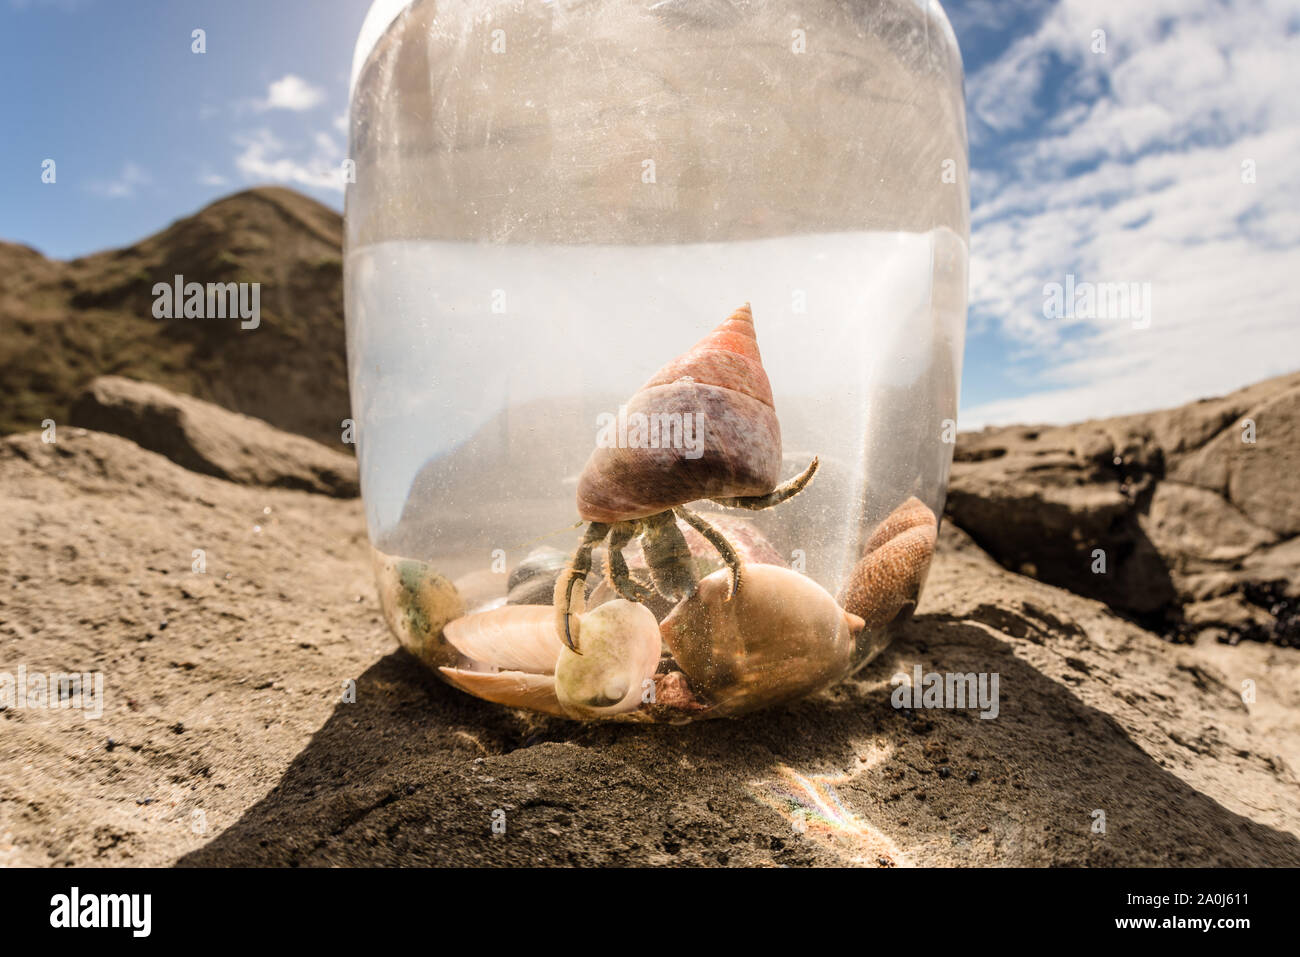 Hermit crab with colorful shell in a bucket Stock Photo